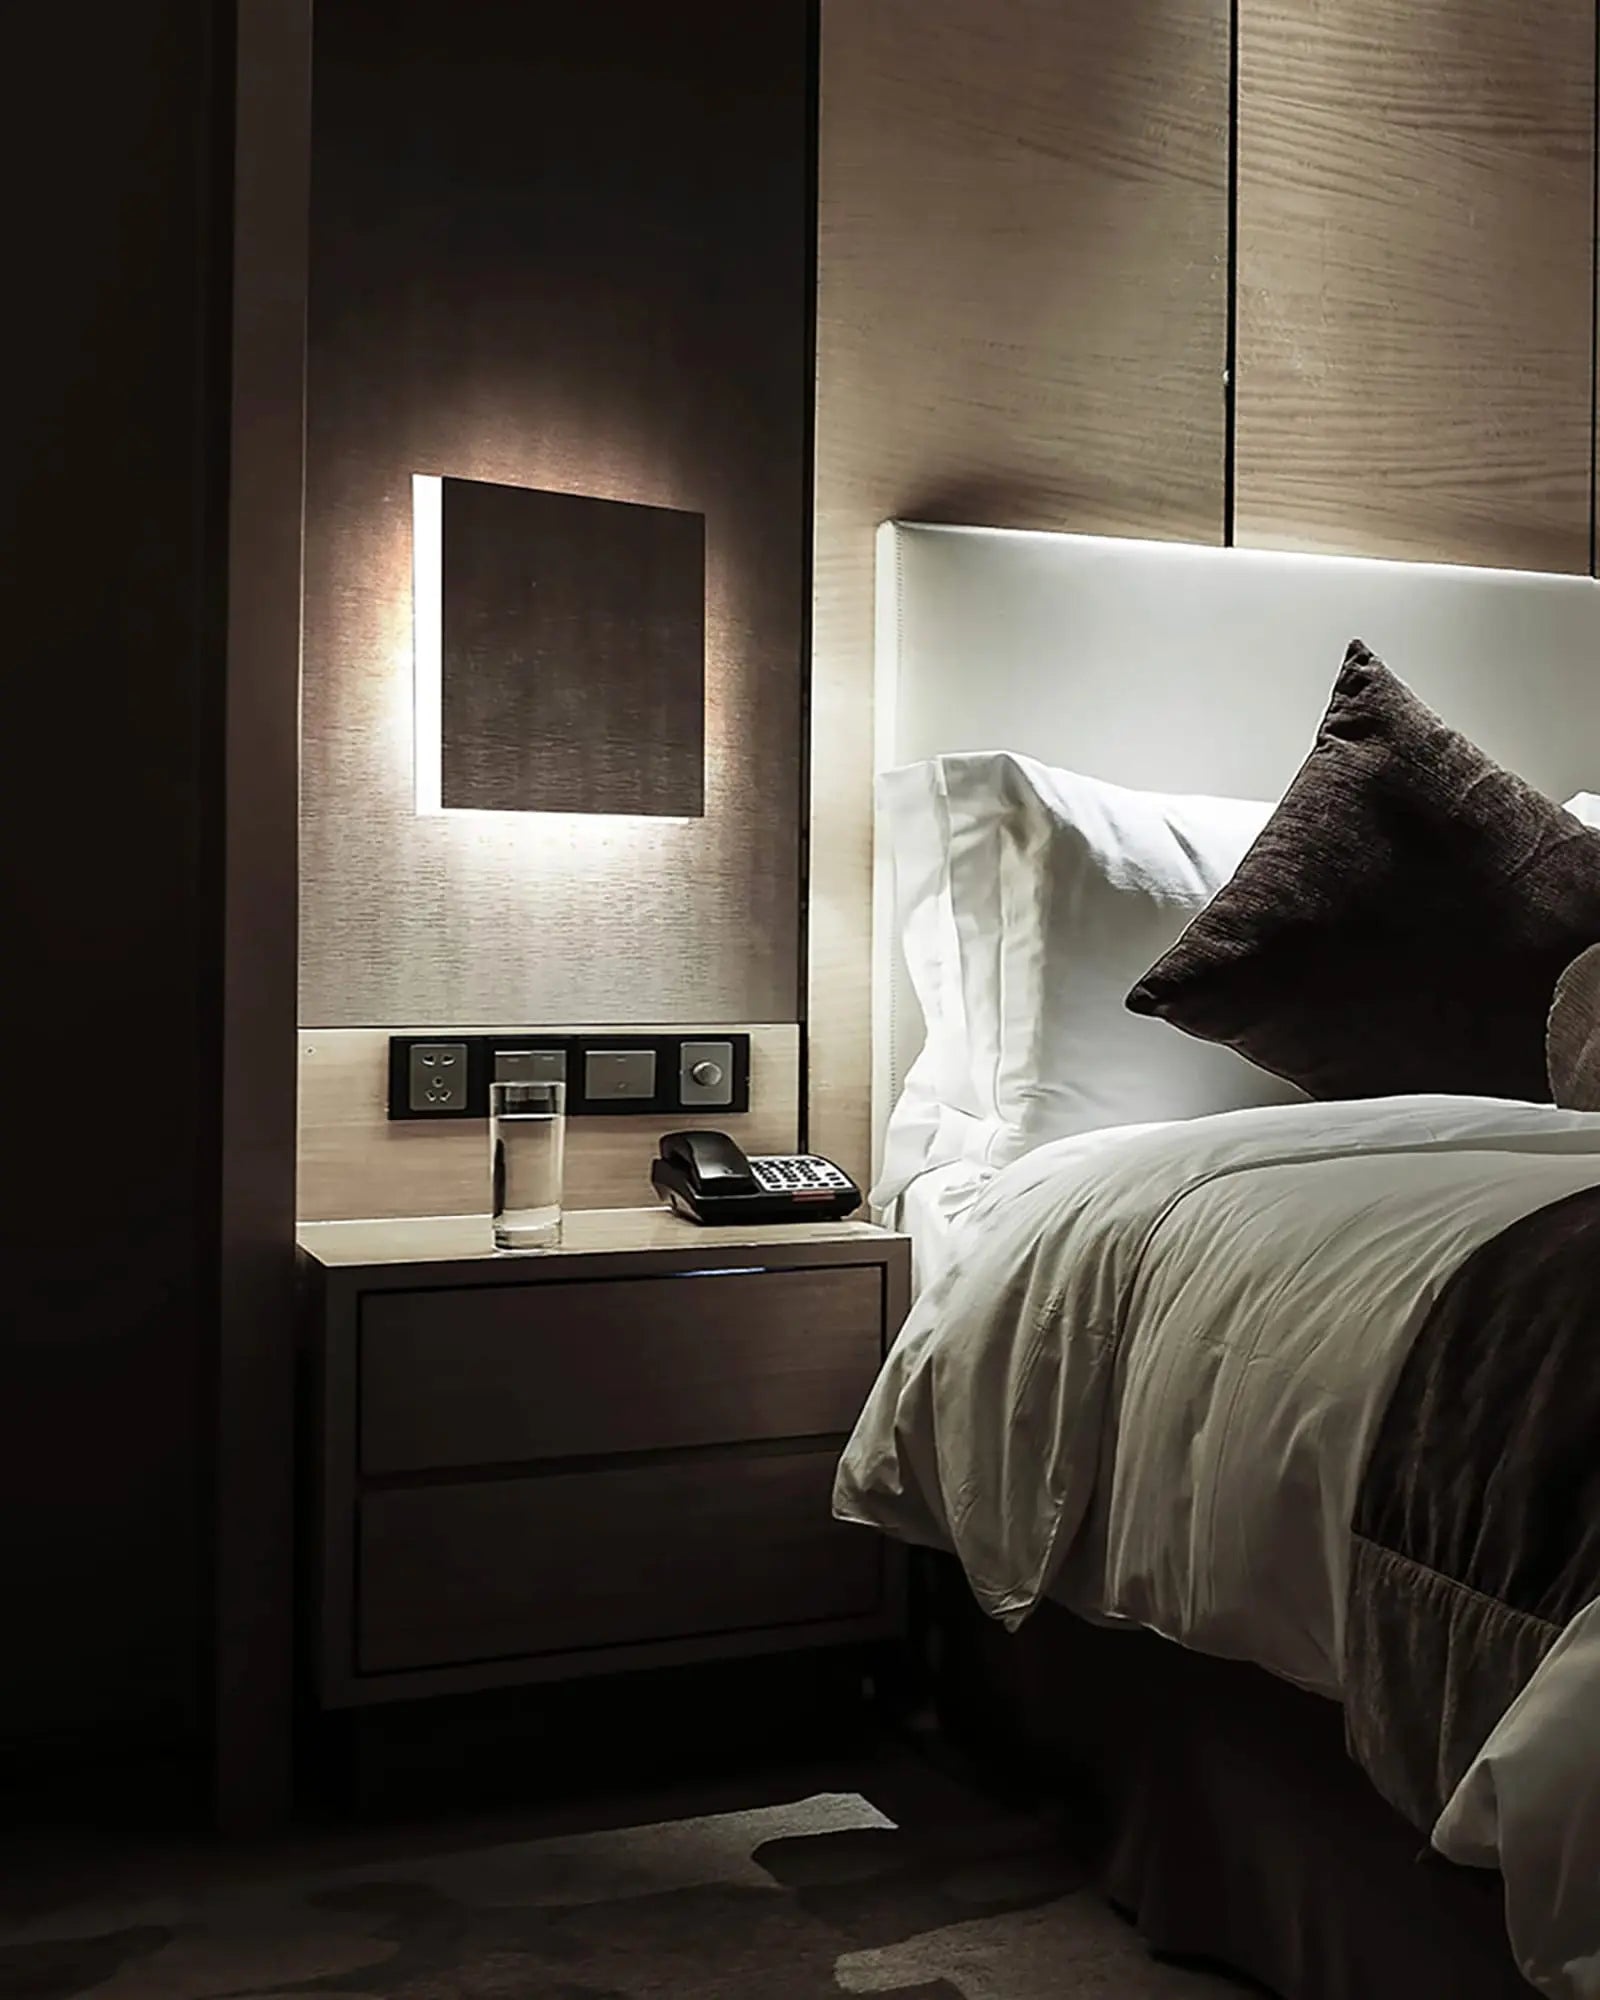 Aldecimo made in Italy square flat wall light in a hotel room bedside